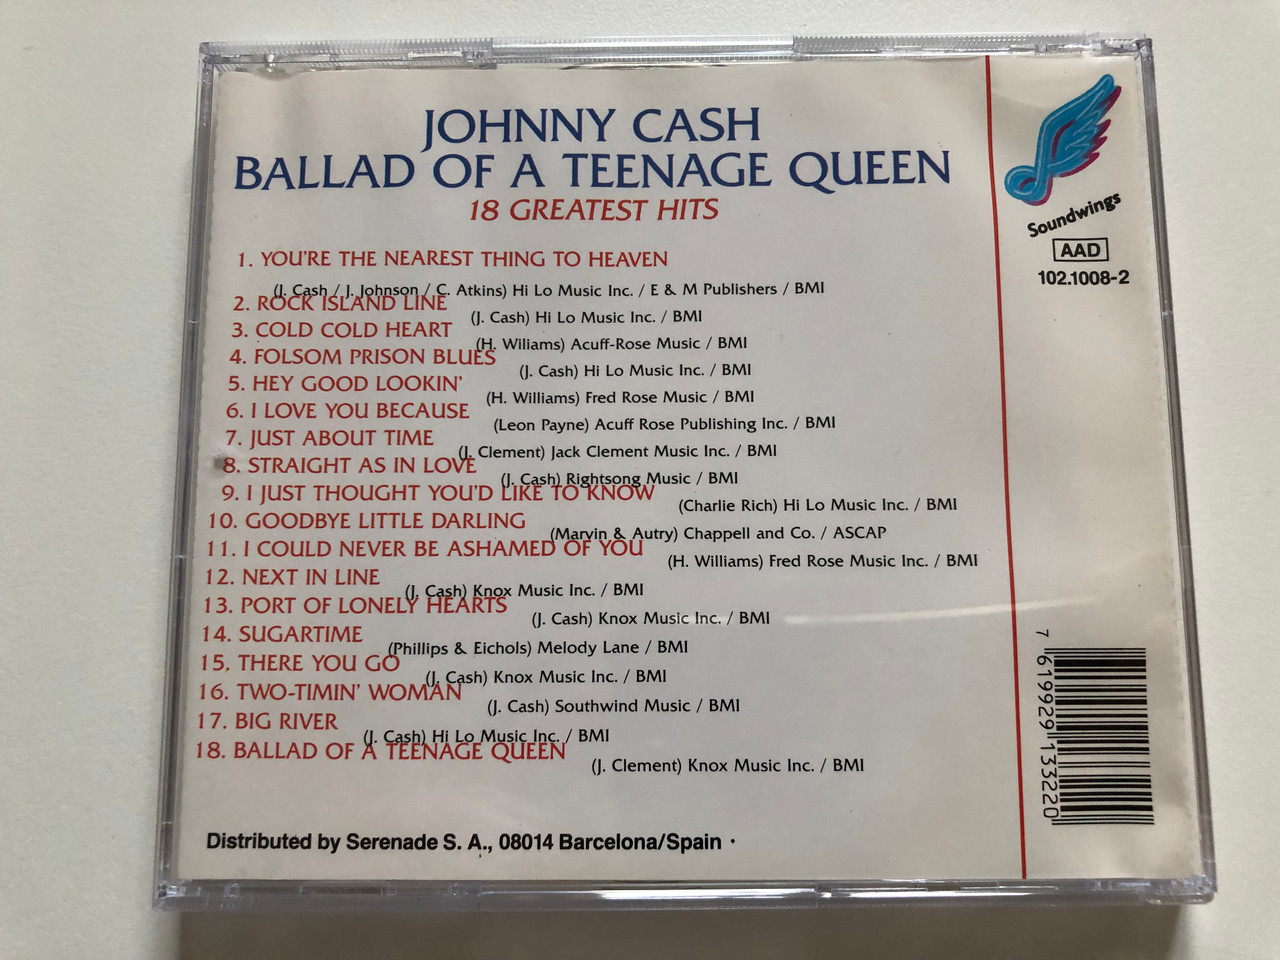 https://cdn10.bigcommerce.com/s-62bdpkt7pb/products/30865/images/182097/Johnny_Cash_Ballad_Of_A_Teenage_Queen_-_18_Greatest_Hits_Cold_Cold_Heart_Folsom_Prison_Blues_Just_About_Time_I_Love_You_Because_and_many_others_Soundwings_Audio_CD_102_4__13466.1624295868.1280.1280.JPG?c=2